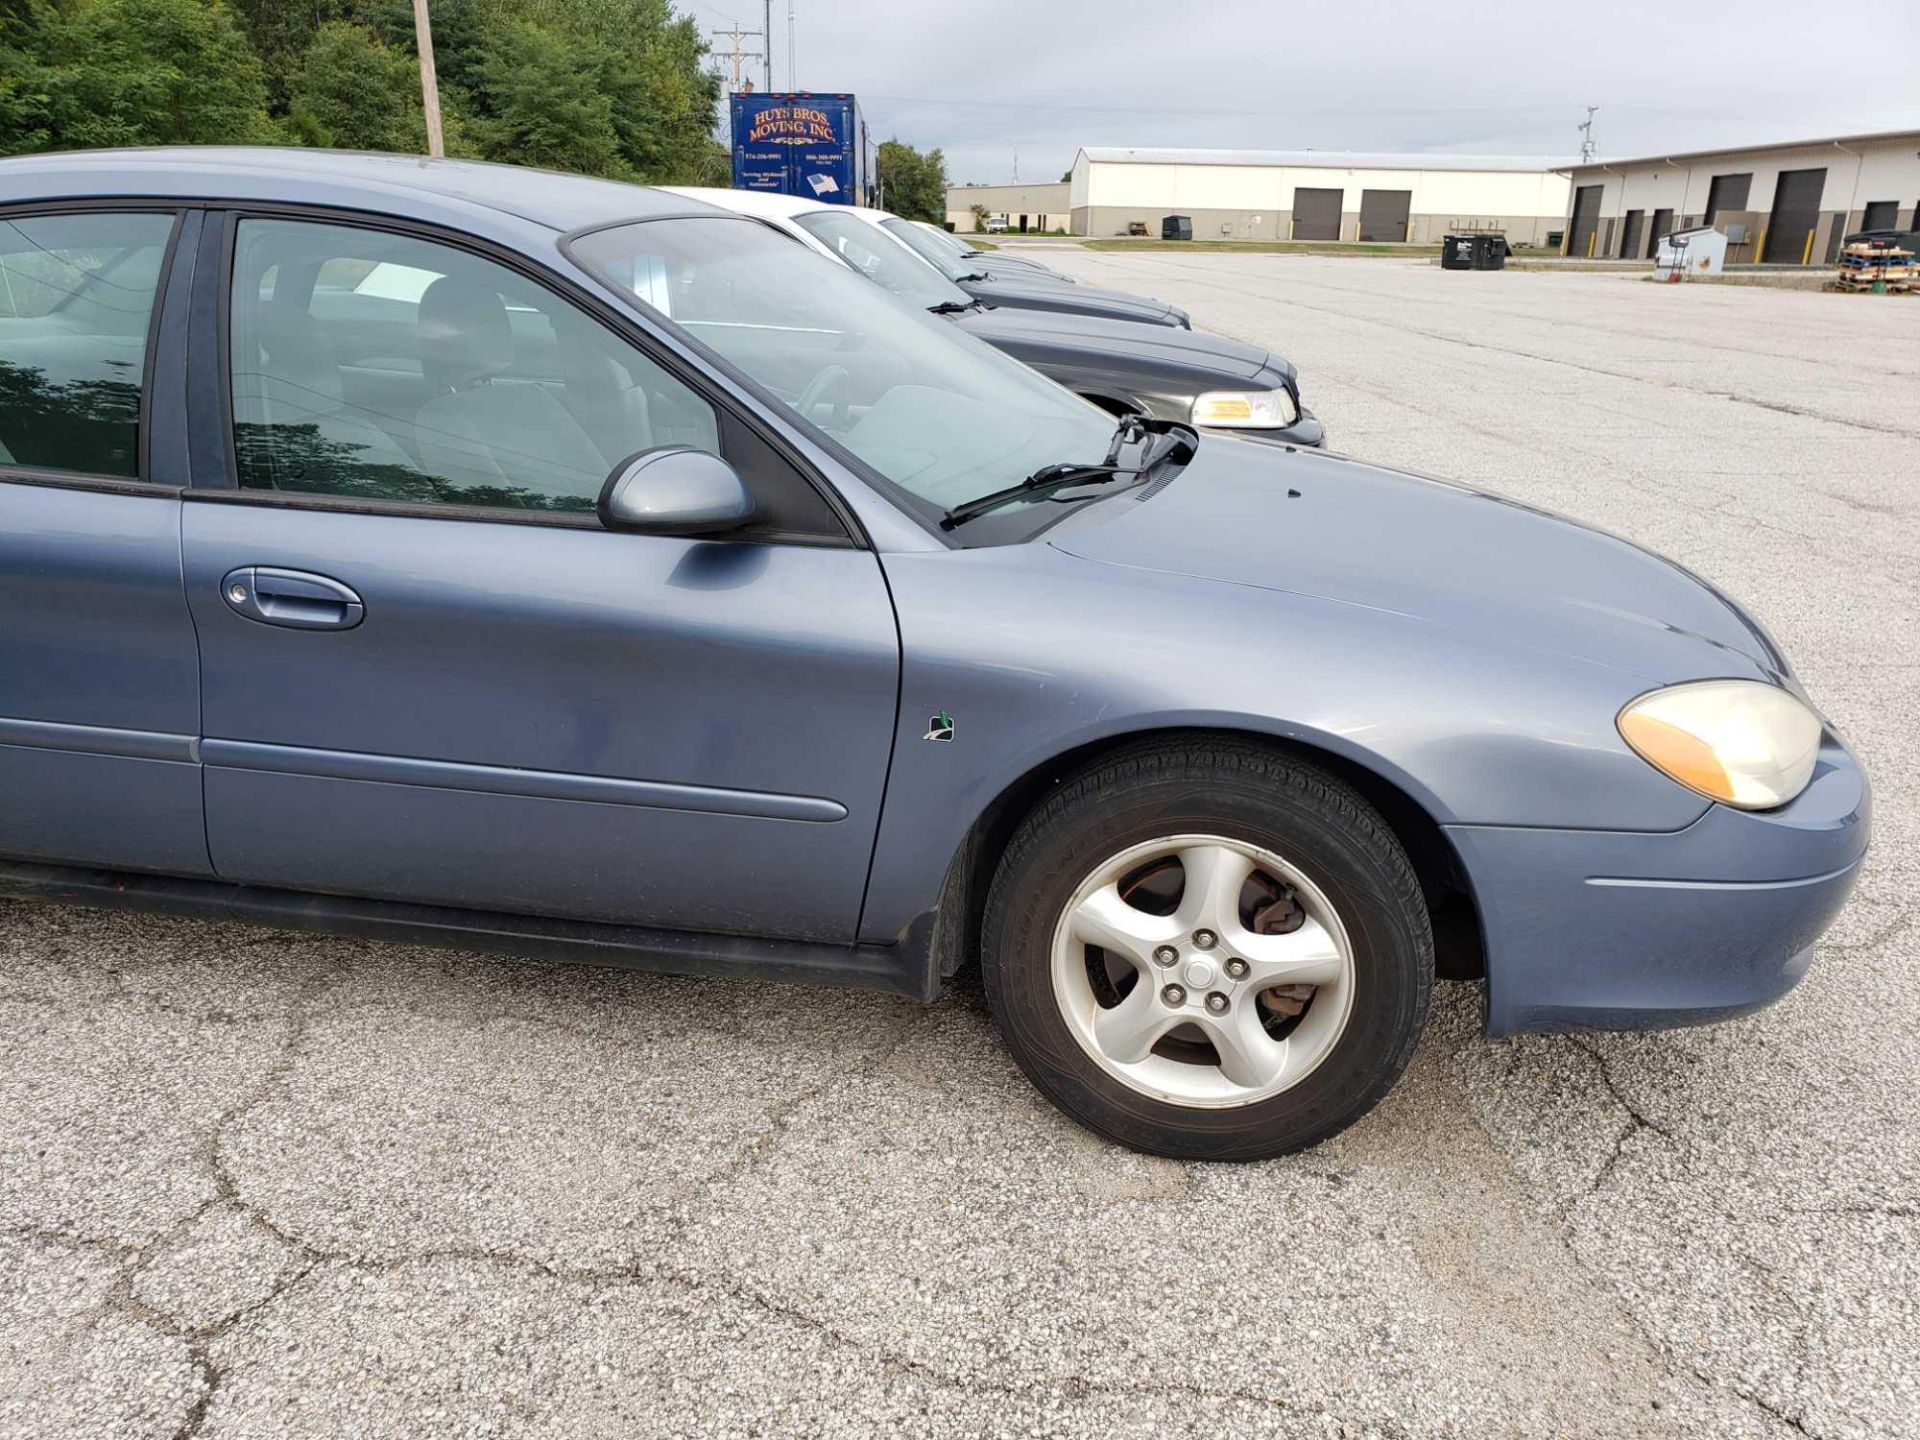 2001 Ford Taurus VIN 1FAFP53291G230229, 70,126 miles. Municipally owned and maintained. - Image 6 of 18